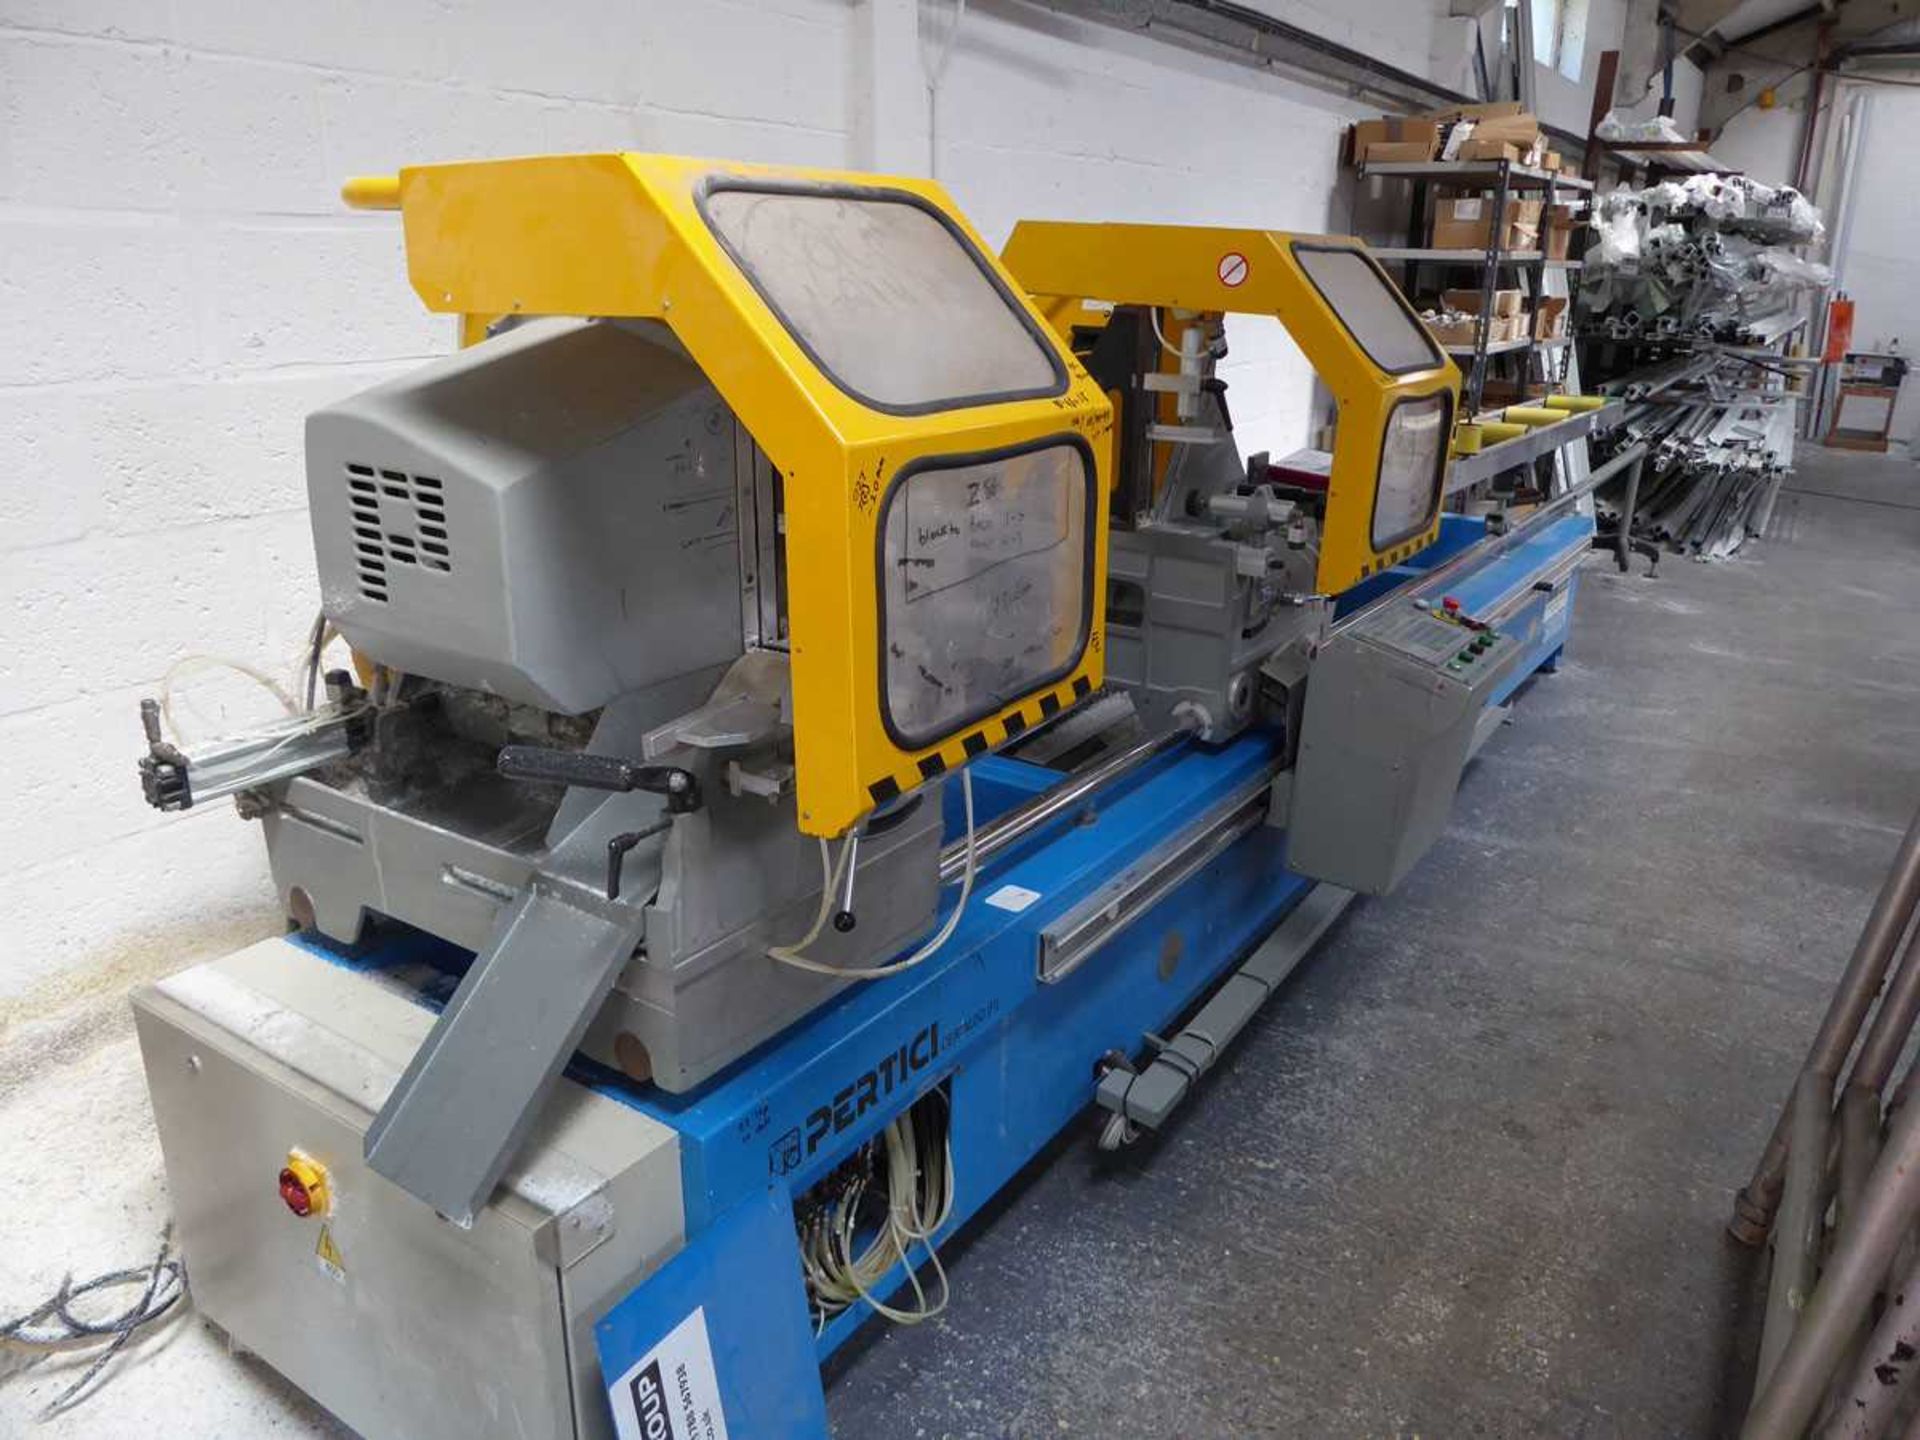 Pertici Univer 500D2K double head PVCu saw, year approx 2004